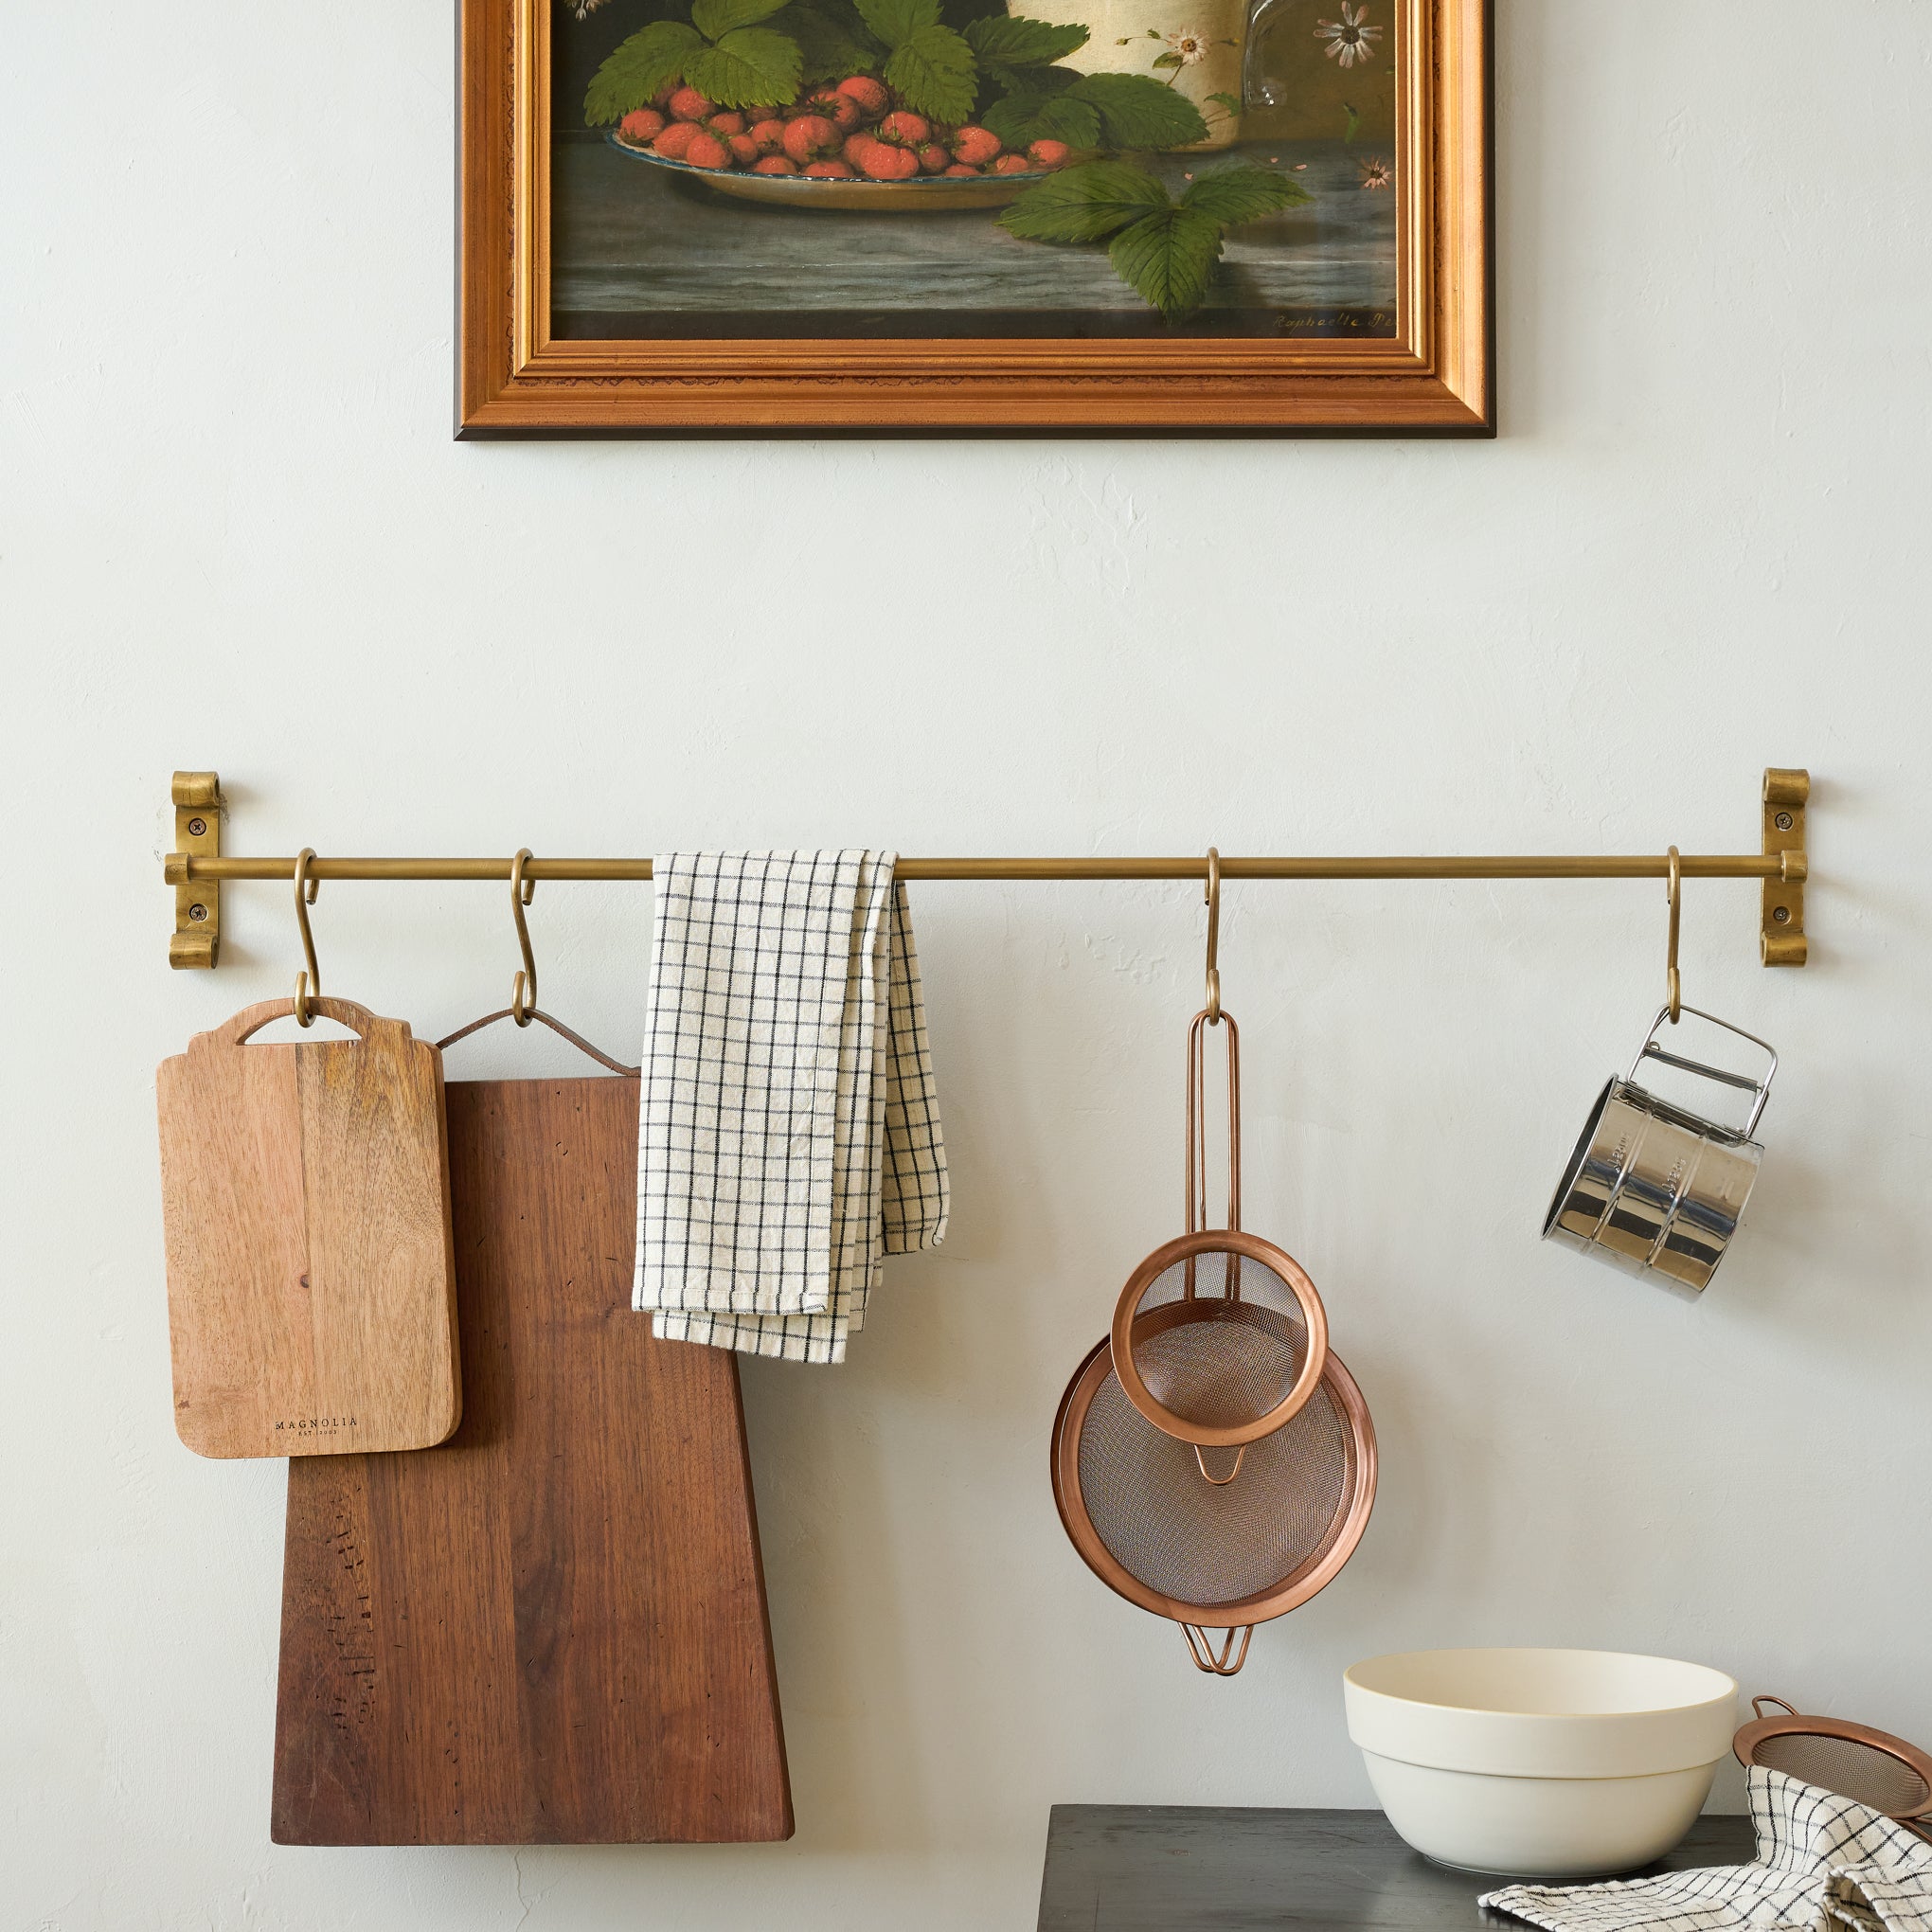 Duke Brass Rail with Hooks with kitchen items hanging on hooks On sale for $54.40, discounted from $68.00